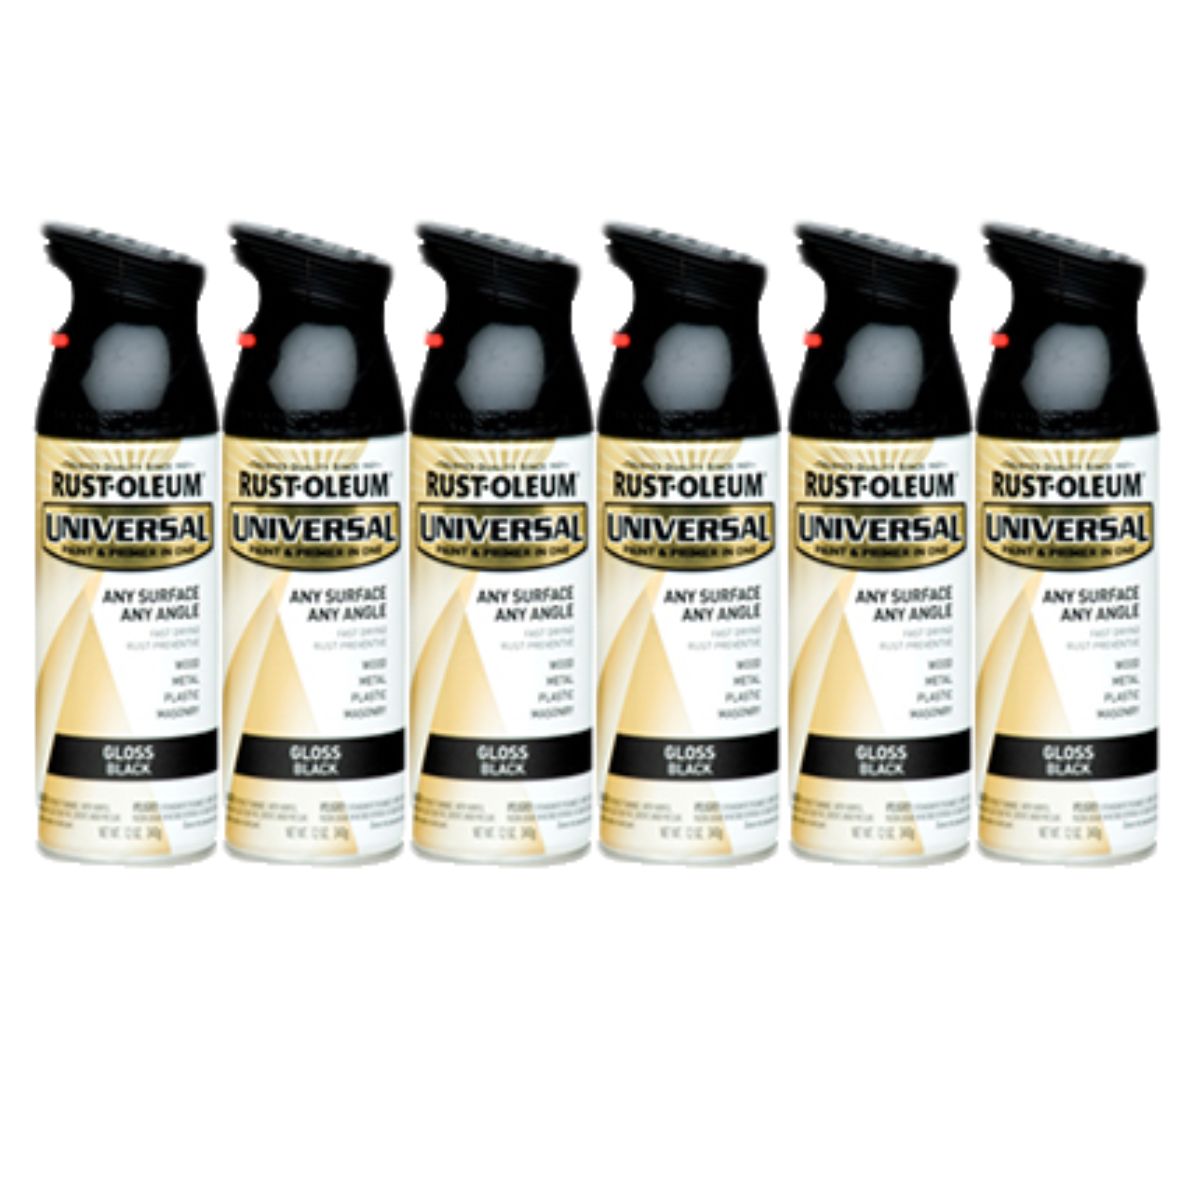 (6 cans) Rust-oleum UNIVERSAL® Gloss Spray Paint | 250361 GLOSS BLACK - South East Clearance Centre